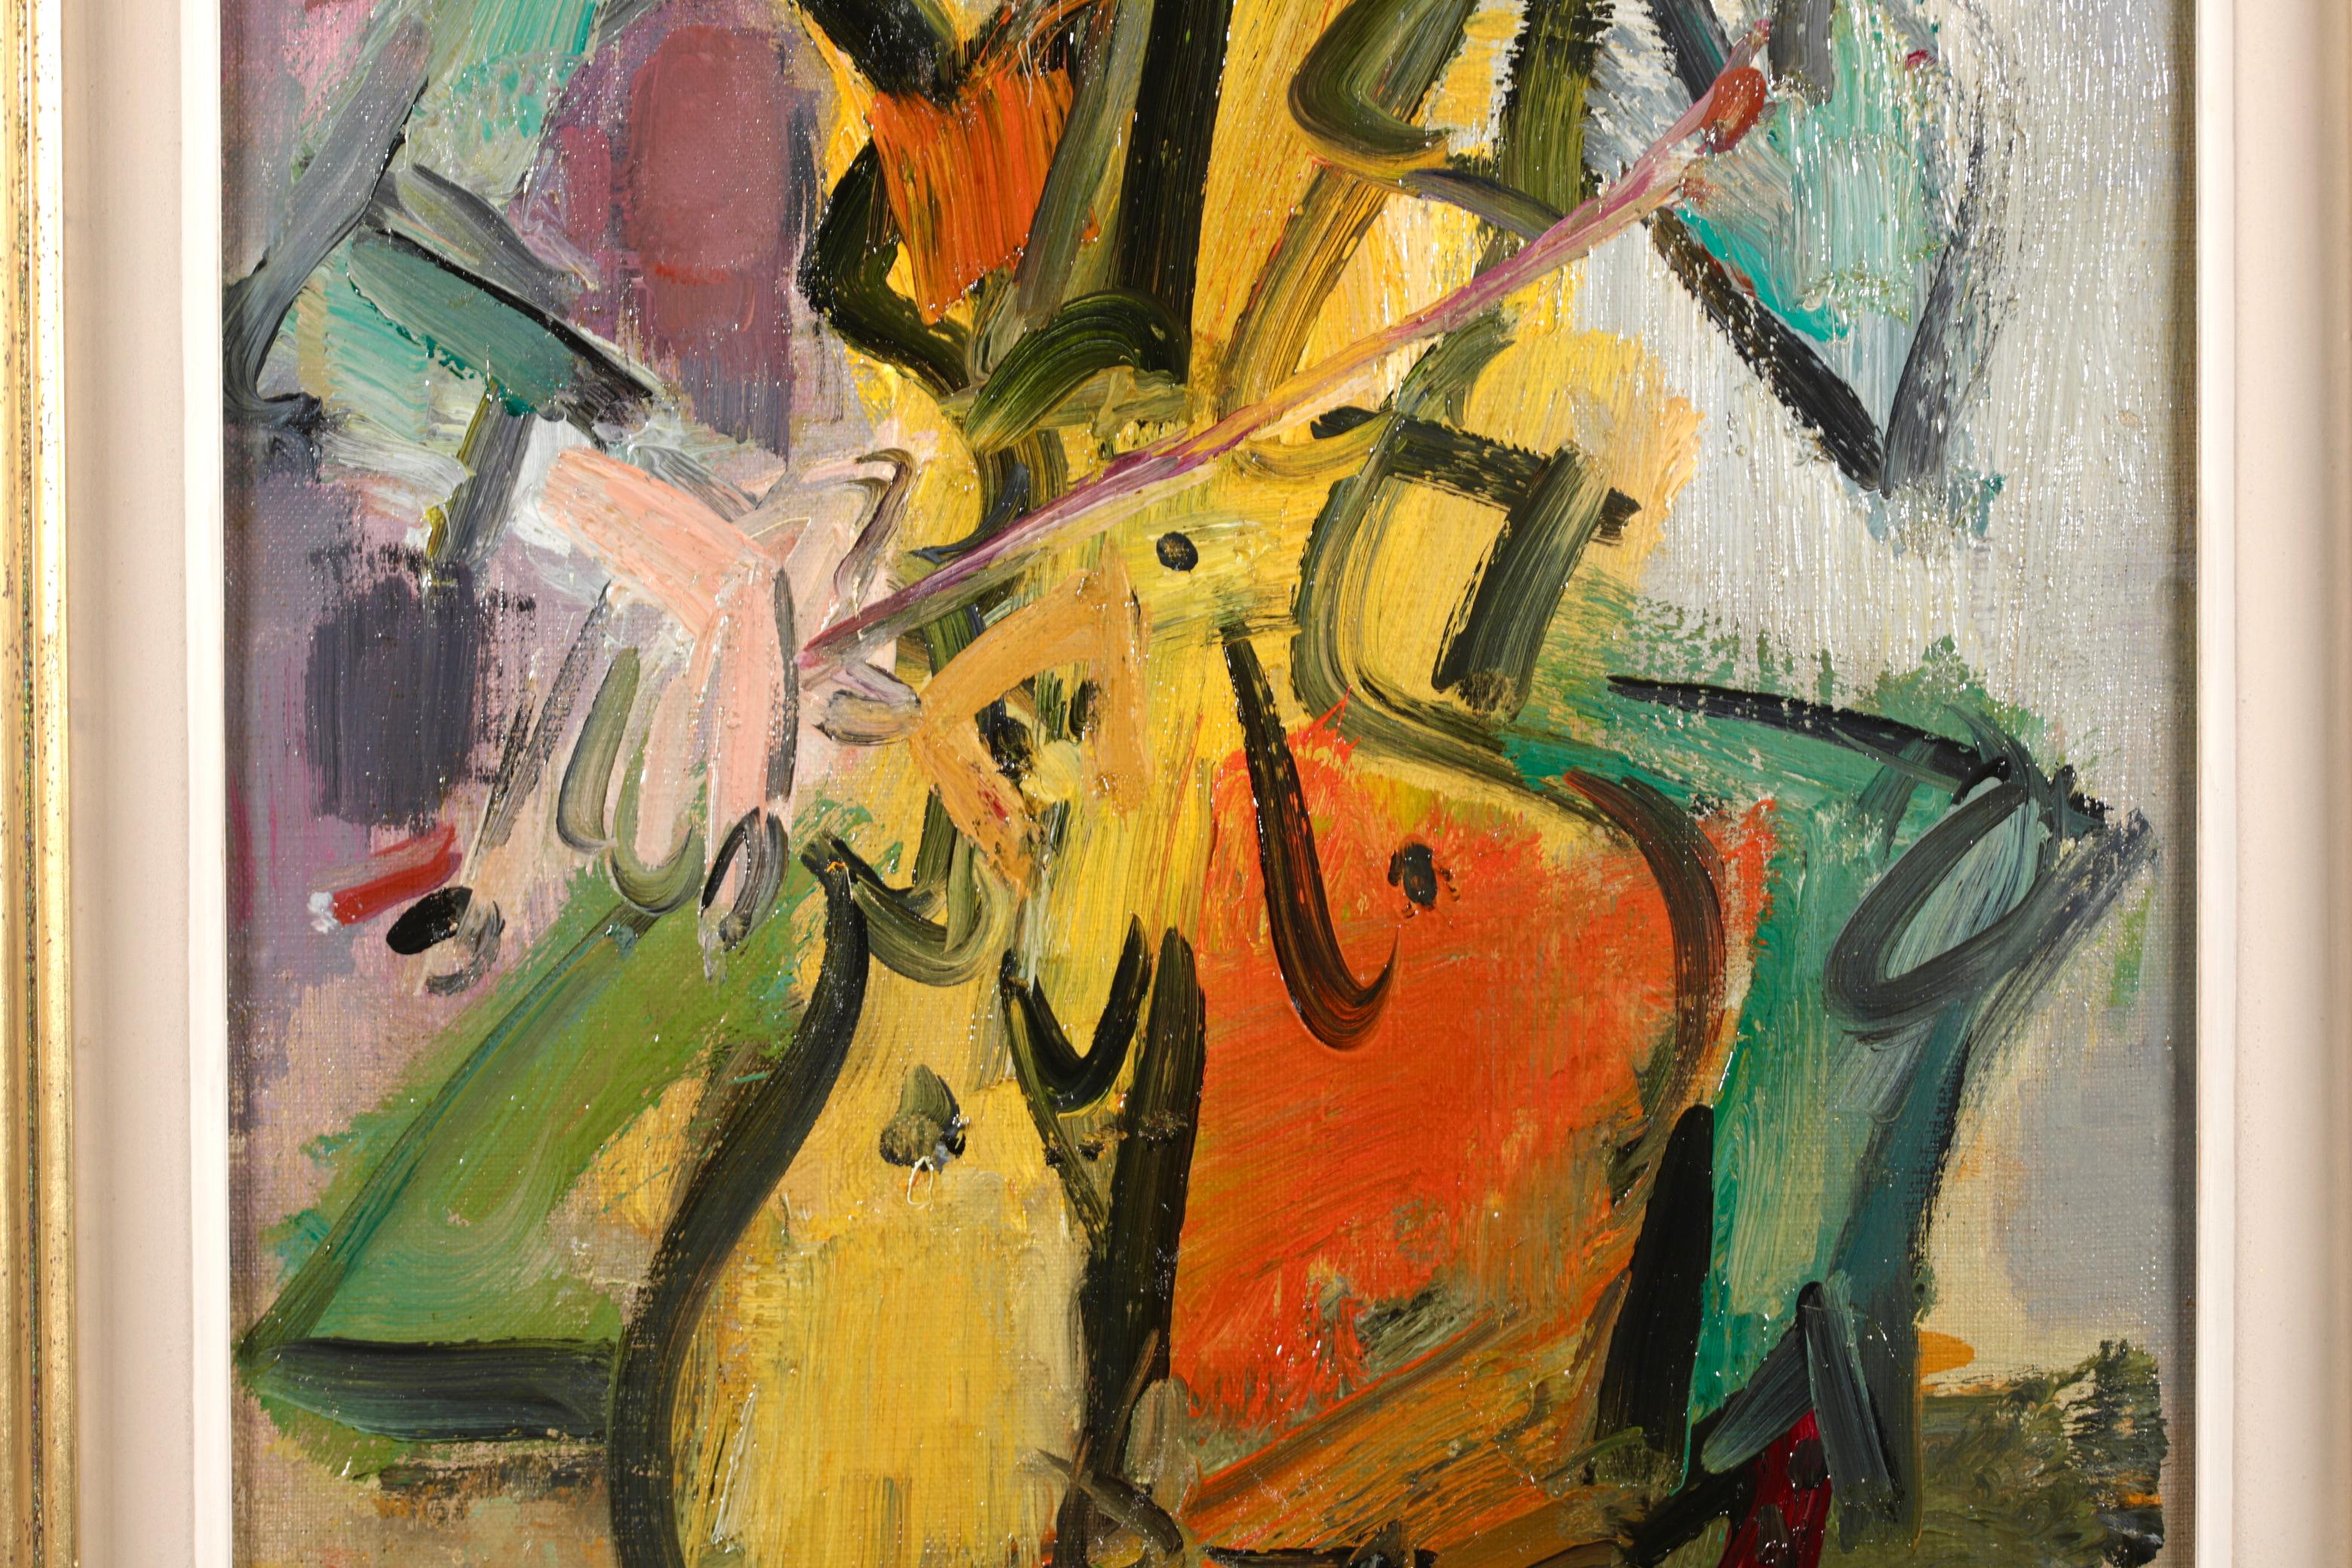 Signed expressionist oil on canvas portrait by French painter and engraver Gen Paul. This charming work depicts a seated musician wearing a green suit with a black bow tie playing the double bass. This beautiful example of Gen Paul's work dates to